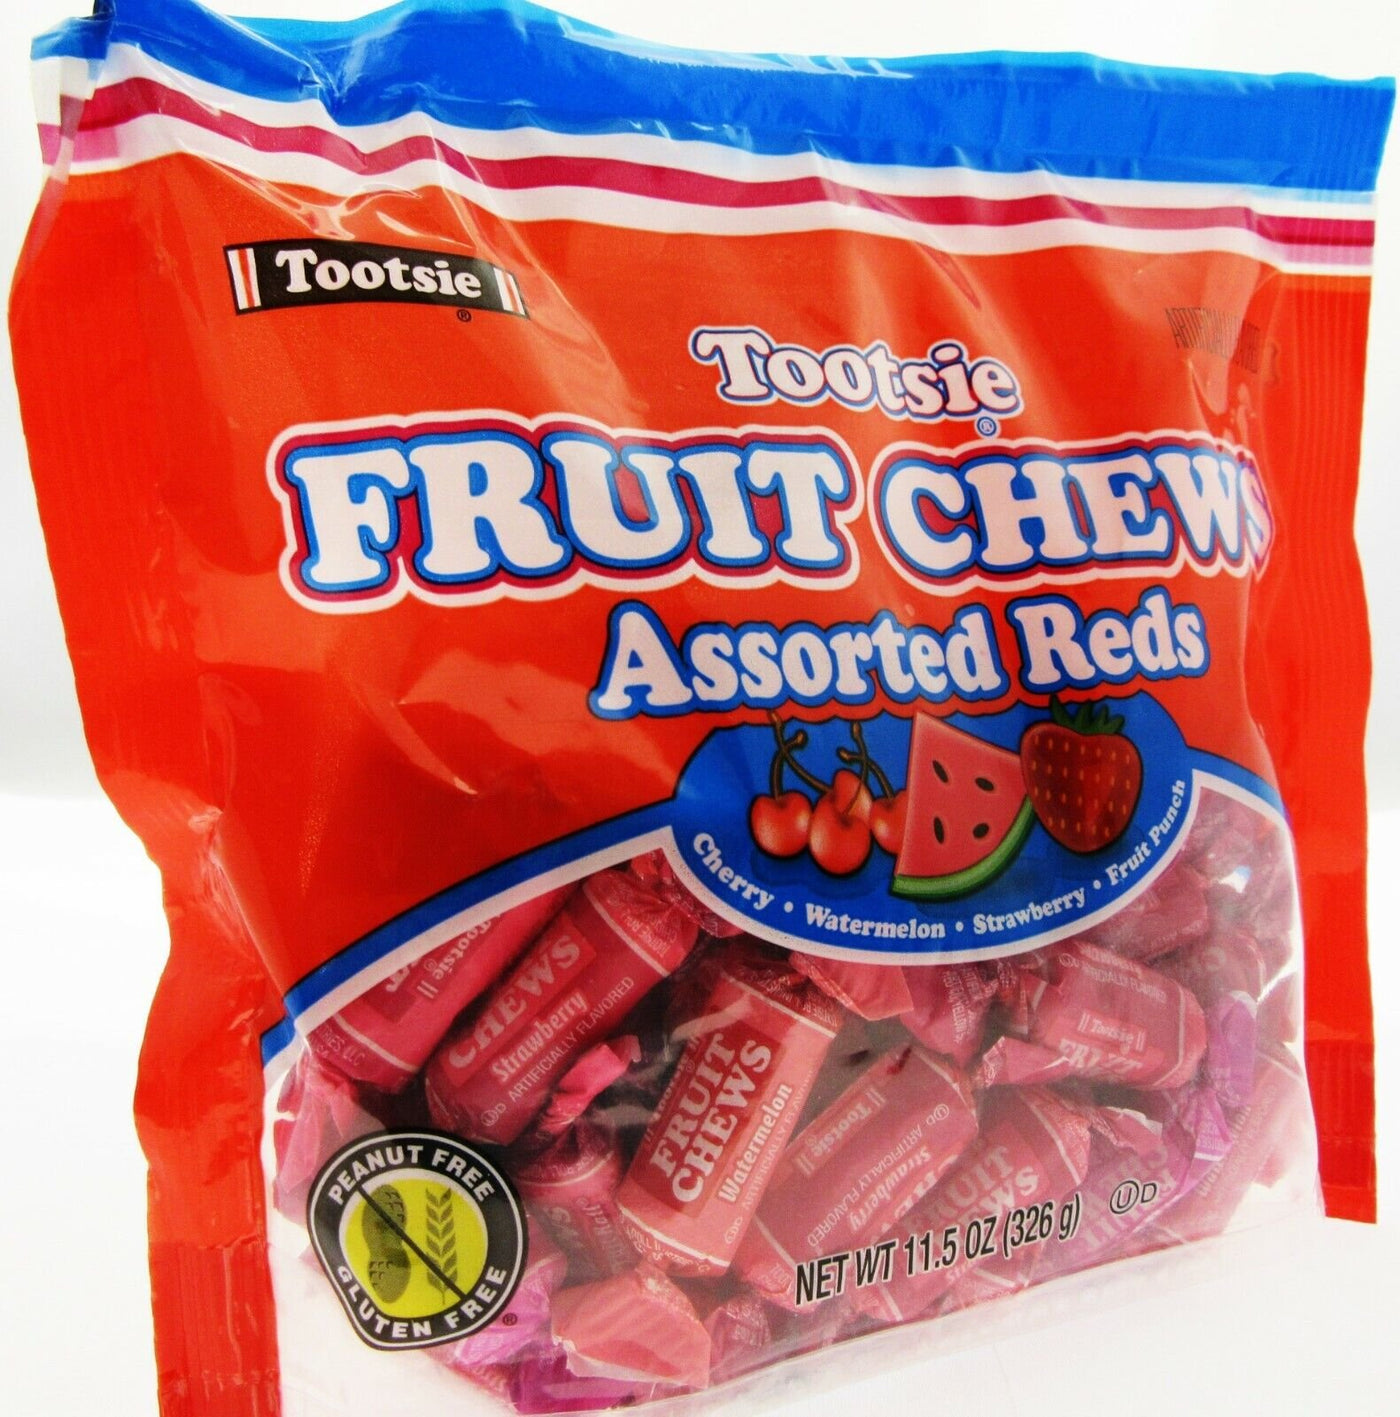 Tootsie Roll Fruit Chews Assorted Reds Rolls Candy Candies ~ 11.5oz bag